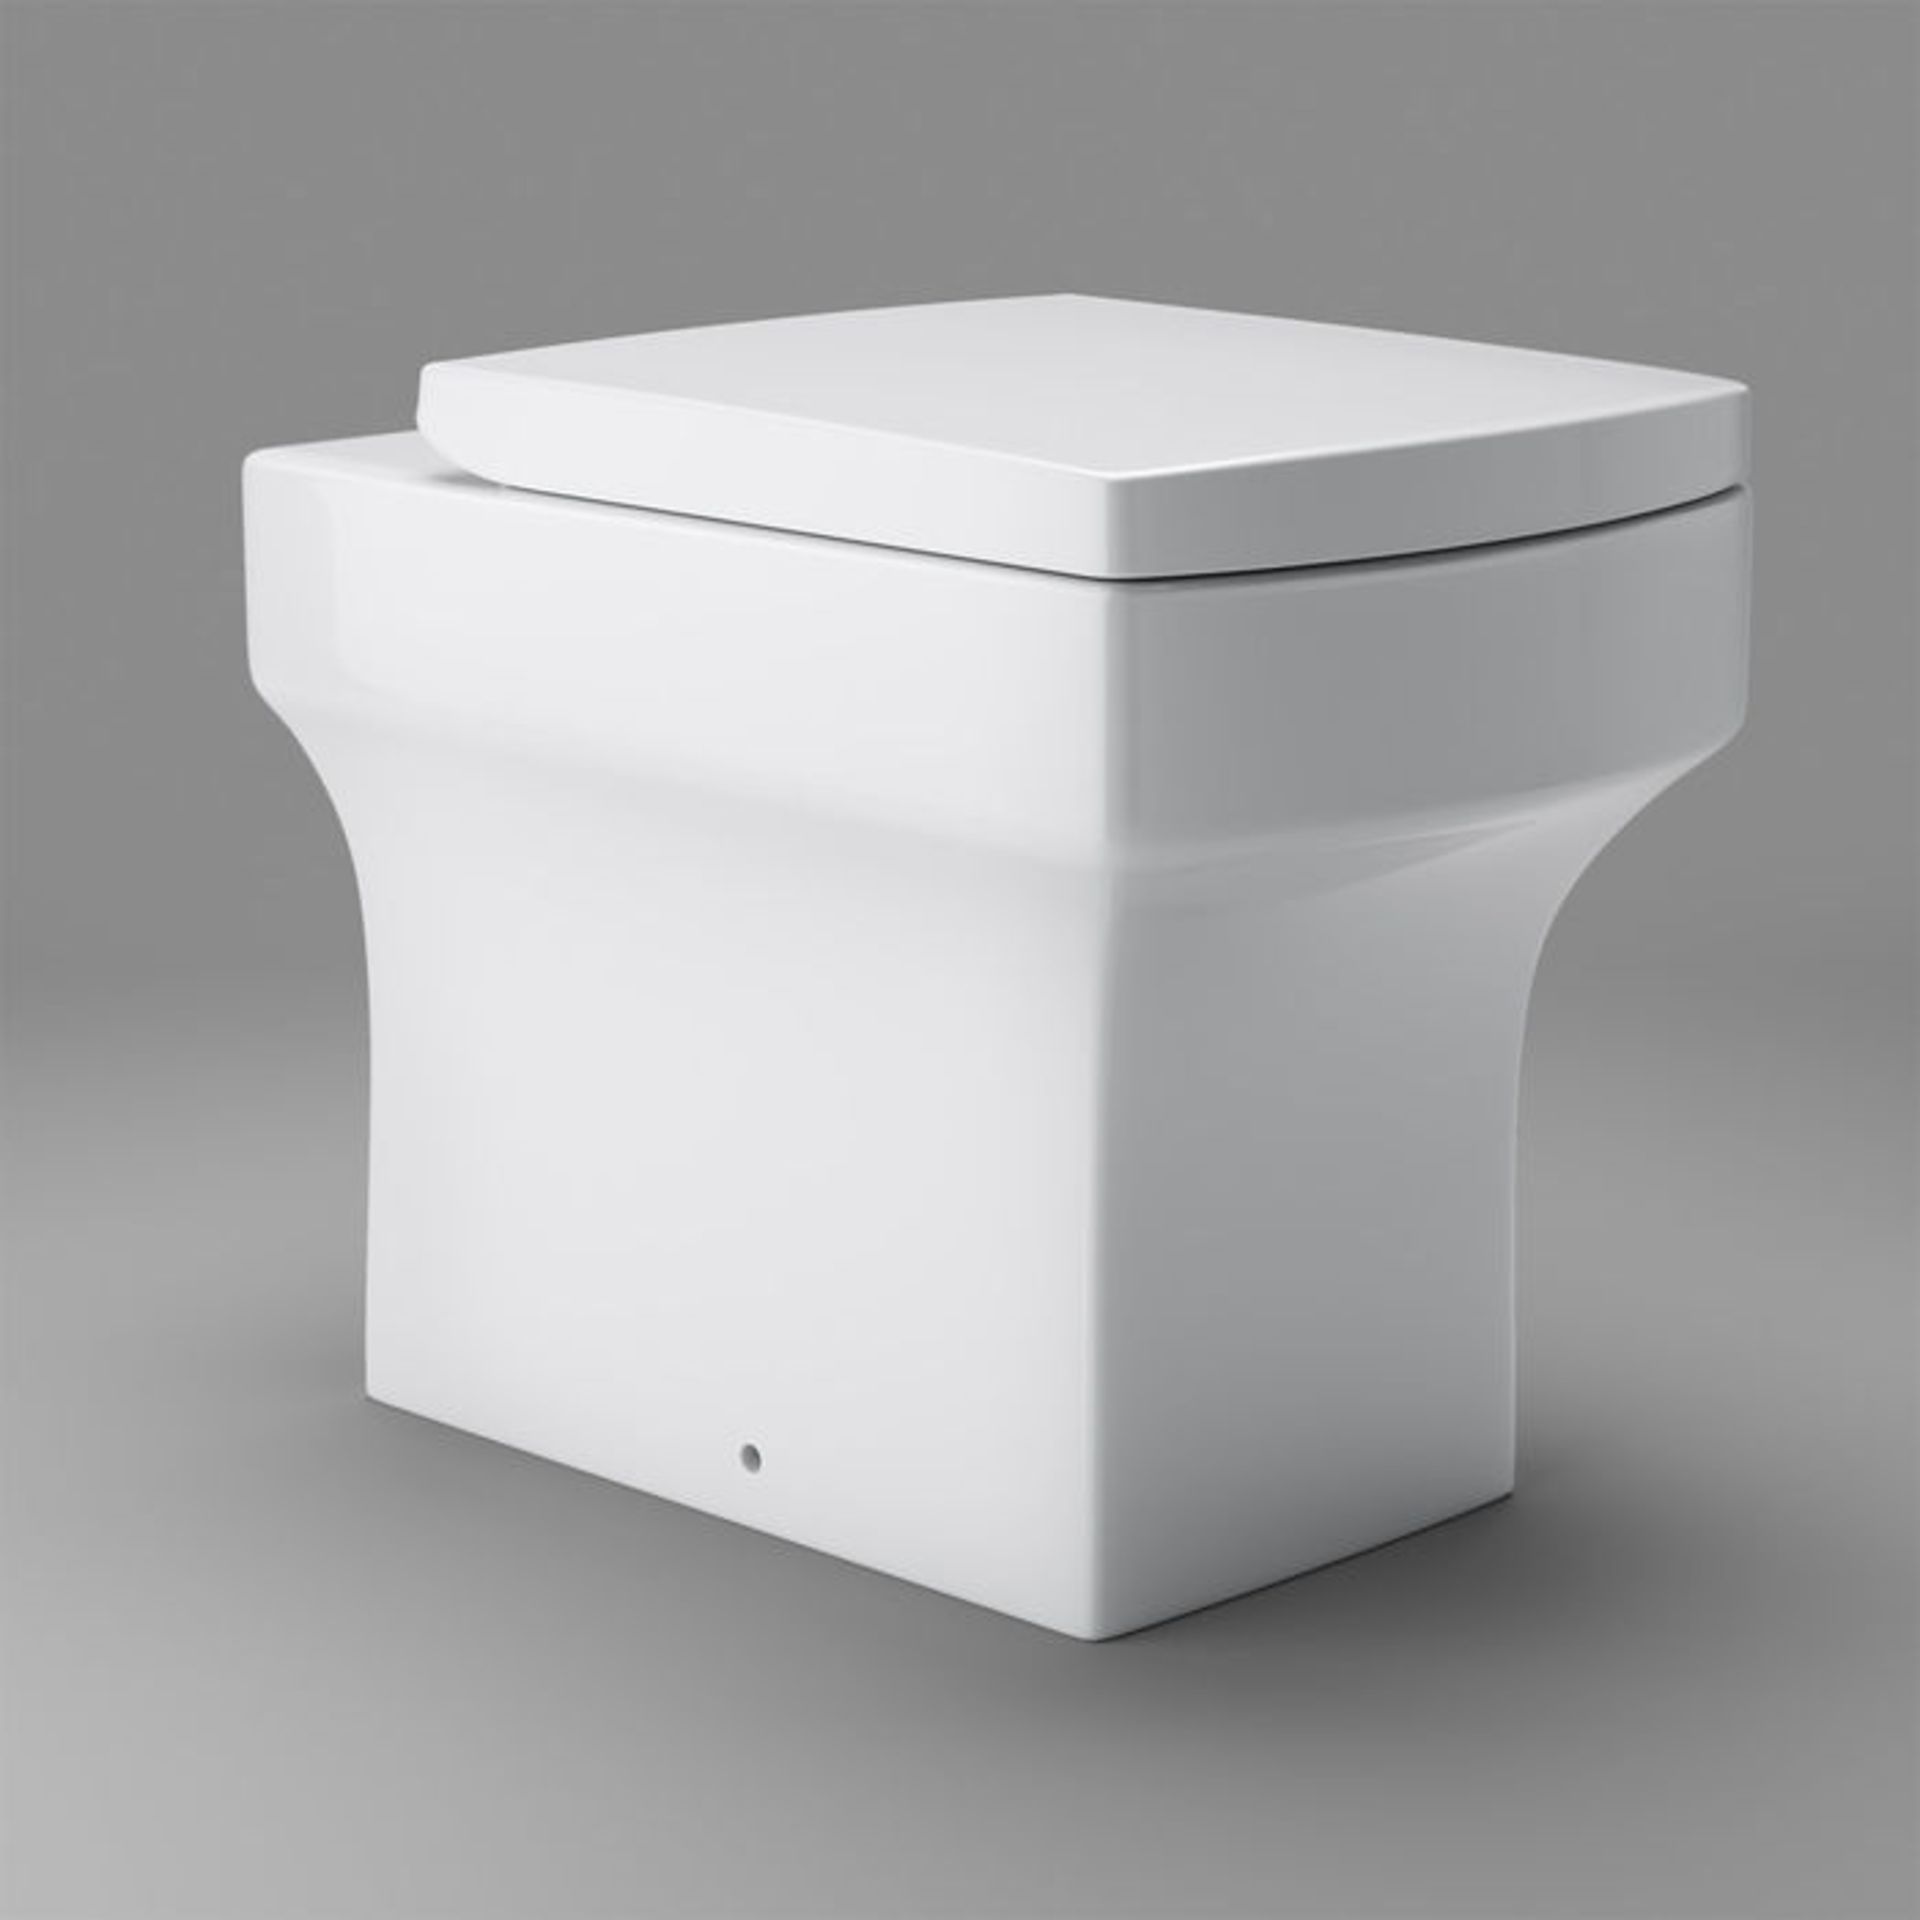 (ZL180) Belfort Back to Wall Toilet inc Soft Close Seat. Made from White Vitreous China Anti-scratch - Image 3 of 4